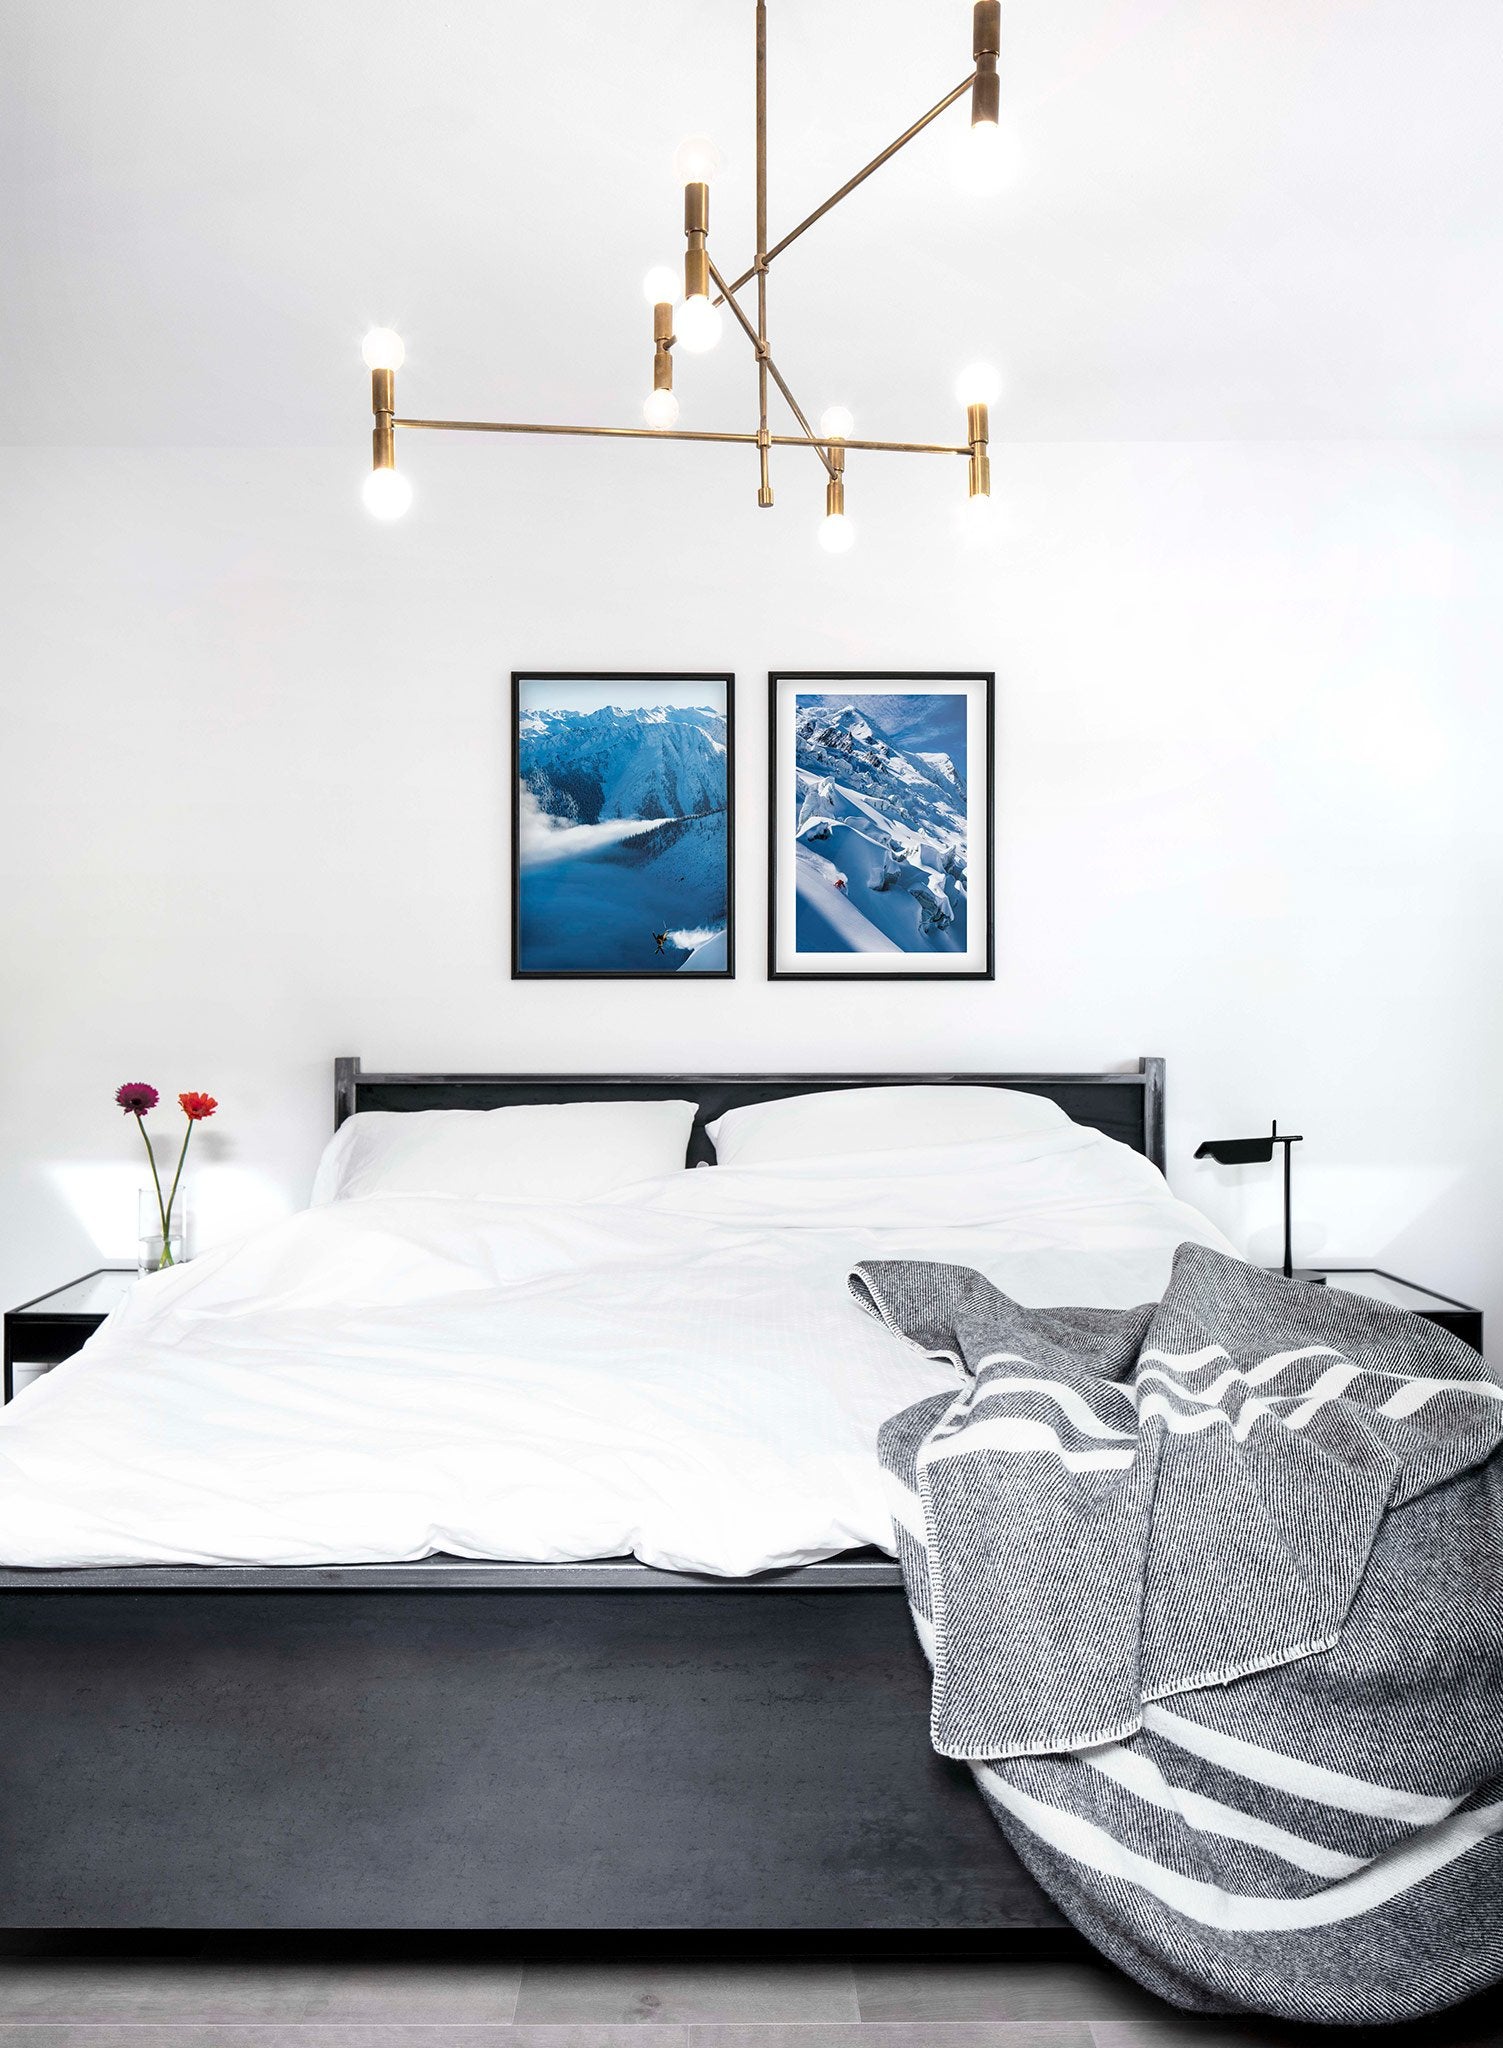 Landscape photography poster by Opposite Wall with snowy mountain peaks - Lifestyle Duo - Bedroom